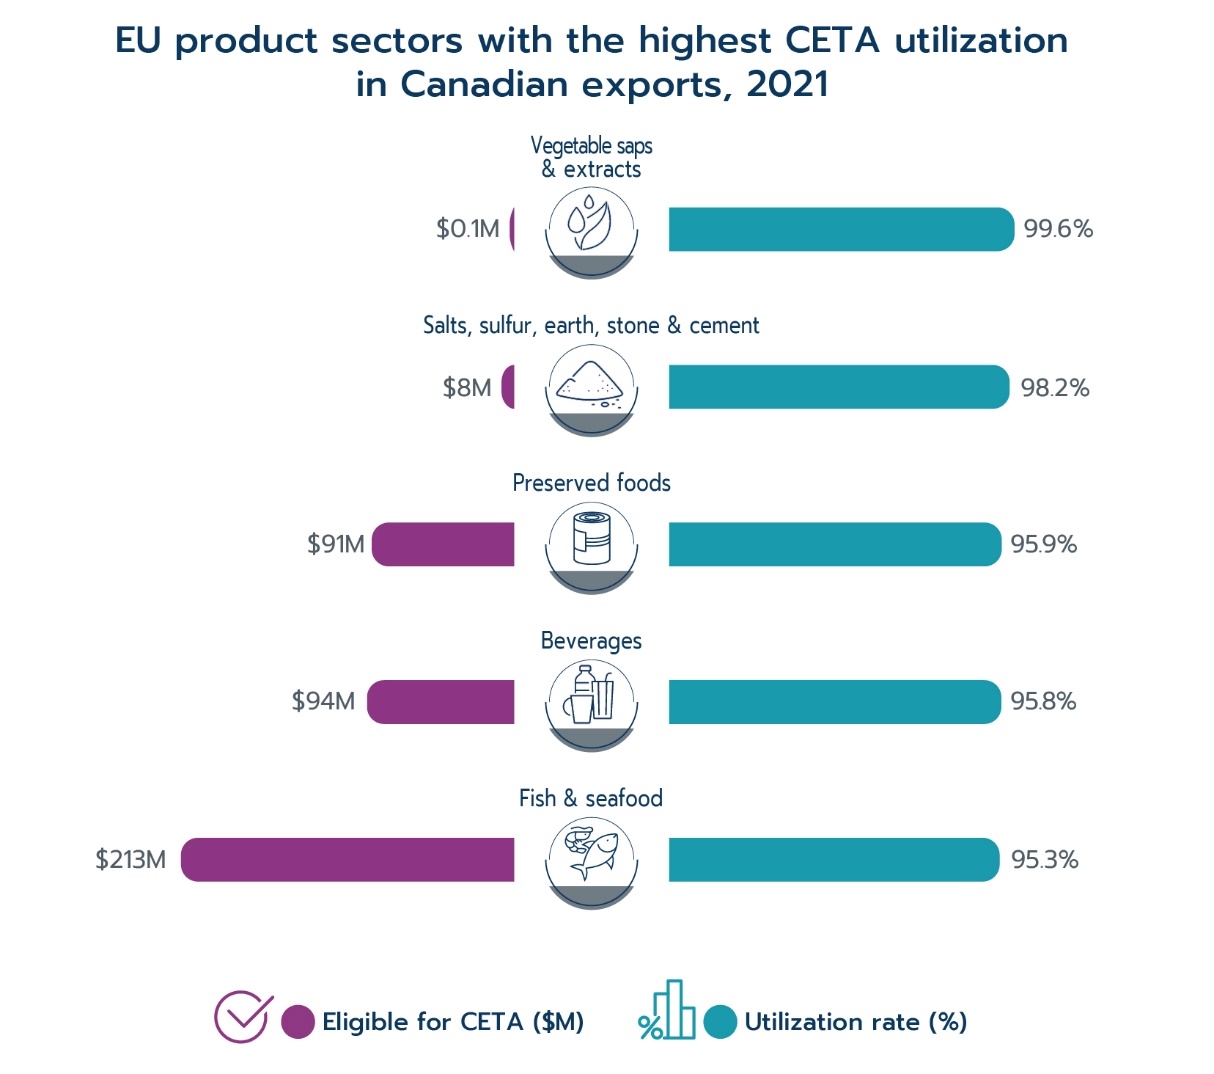 EU product sectors with the highest CETA utilization in Canadian exports, 2021